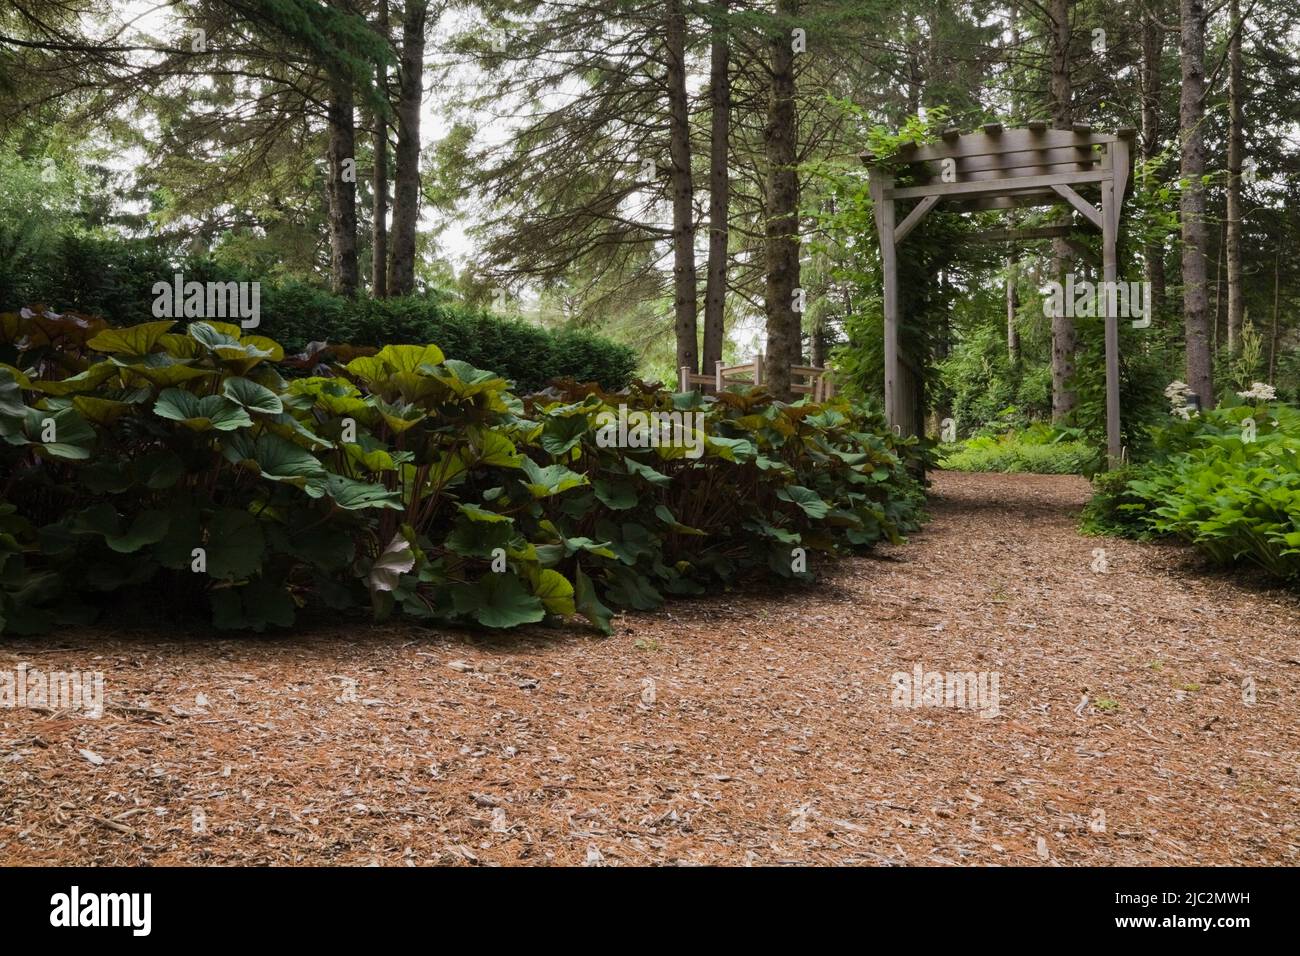 Cedar mulch footpath leading to wooden arbour in landscaped front yard garden in summer. Stock Photo